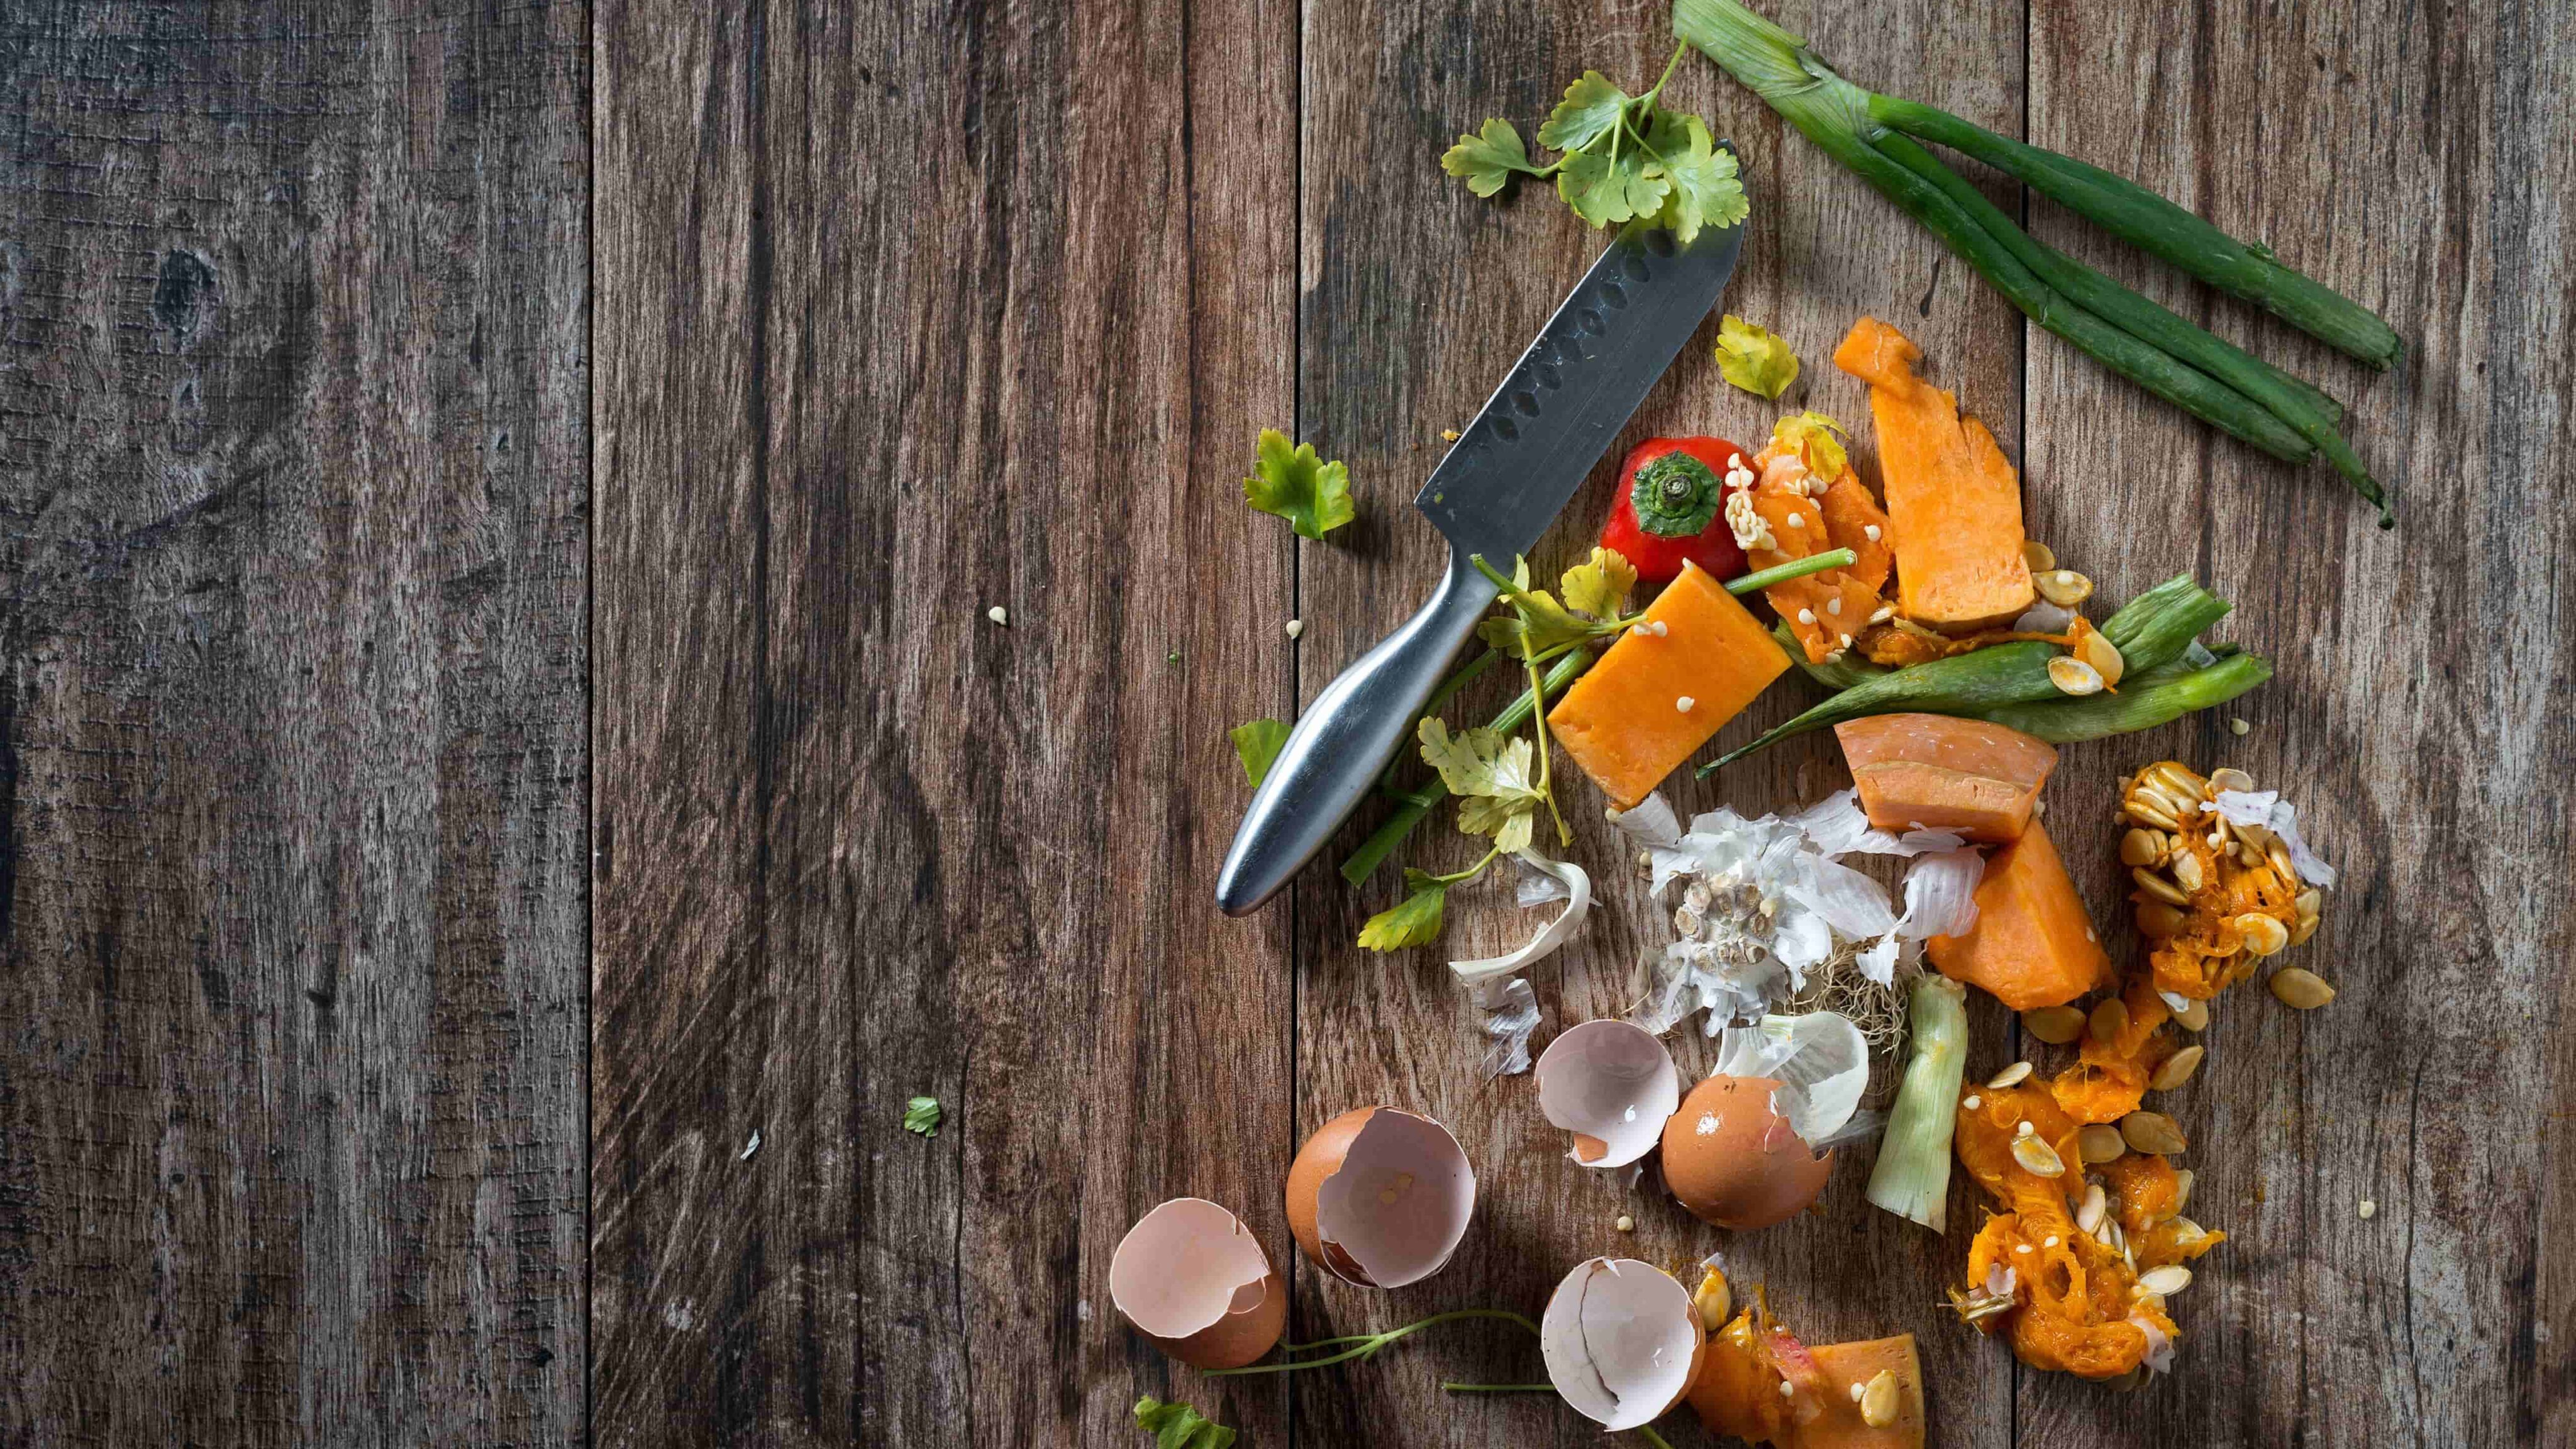 9 tips to avoid food waste